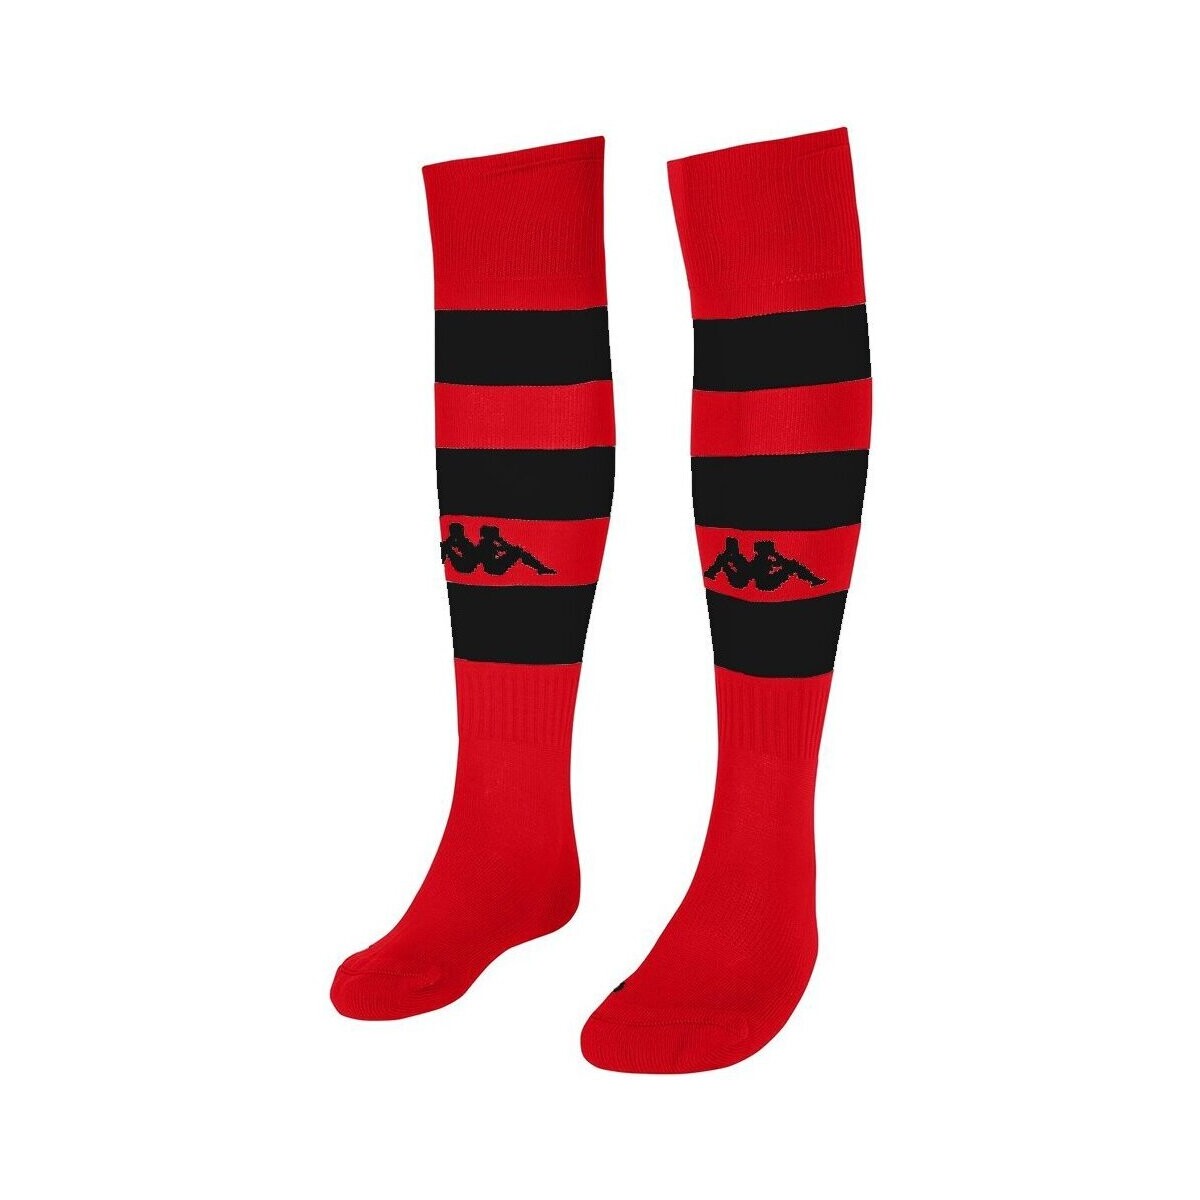 Kappa Rouge Chaussettes Lipeno (3 paires) wD1kmAha